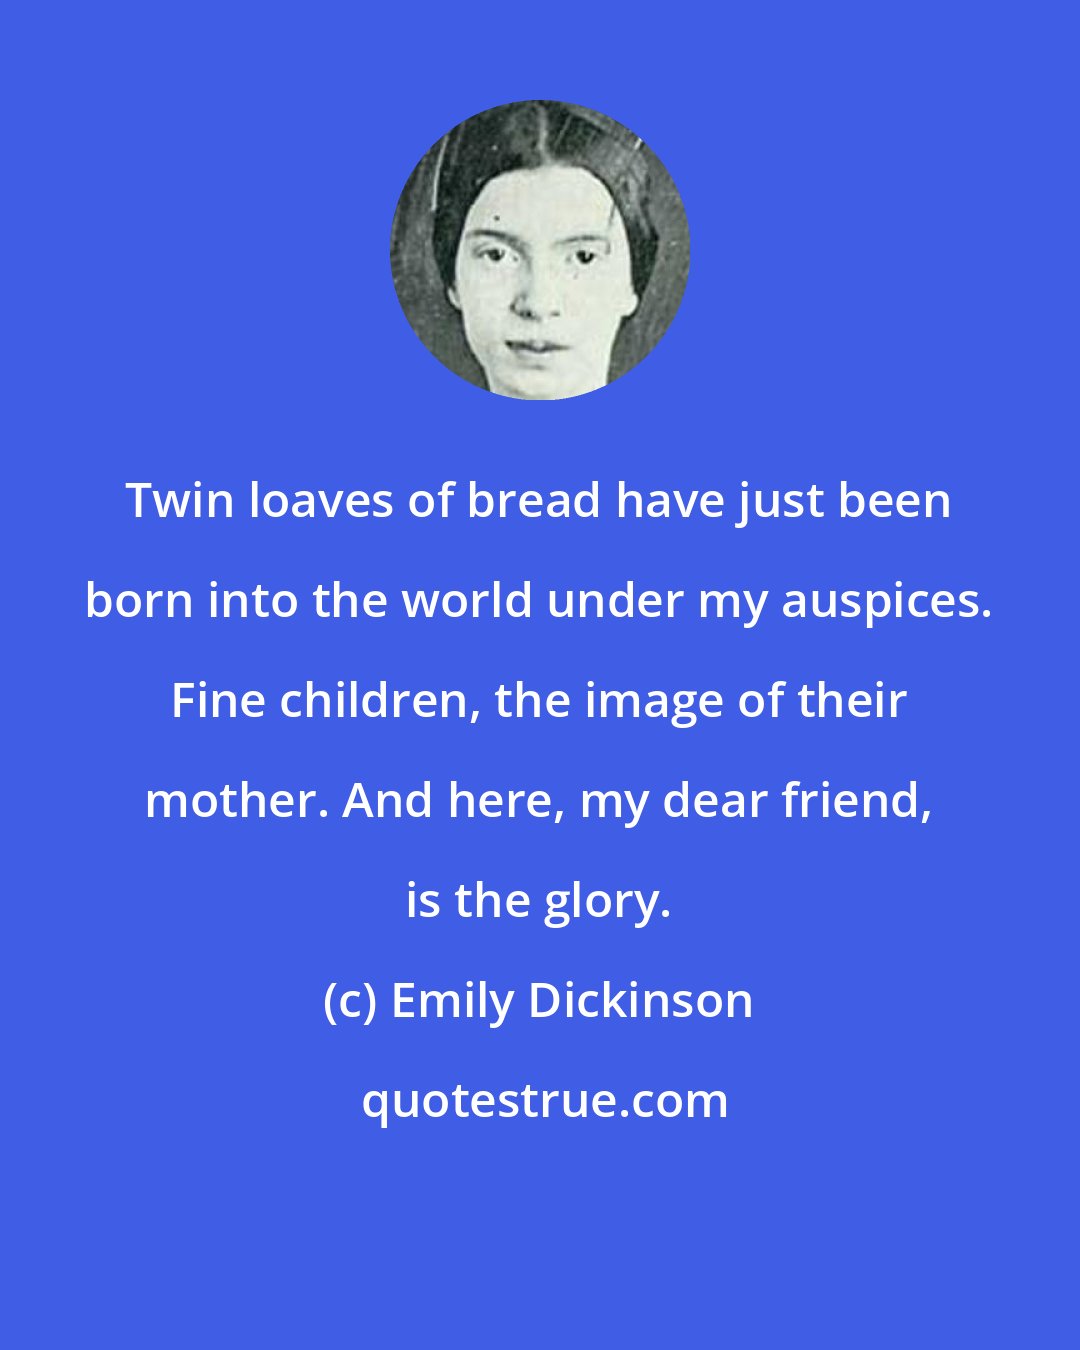 Emily Dickinson: Twin loaves of bread have just been born into the world under my auspices. Fine children, the image of their mother. And here, my dear friend, is the glory.